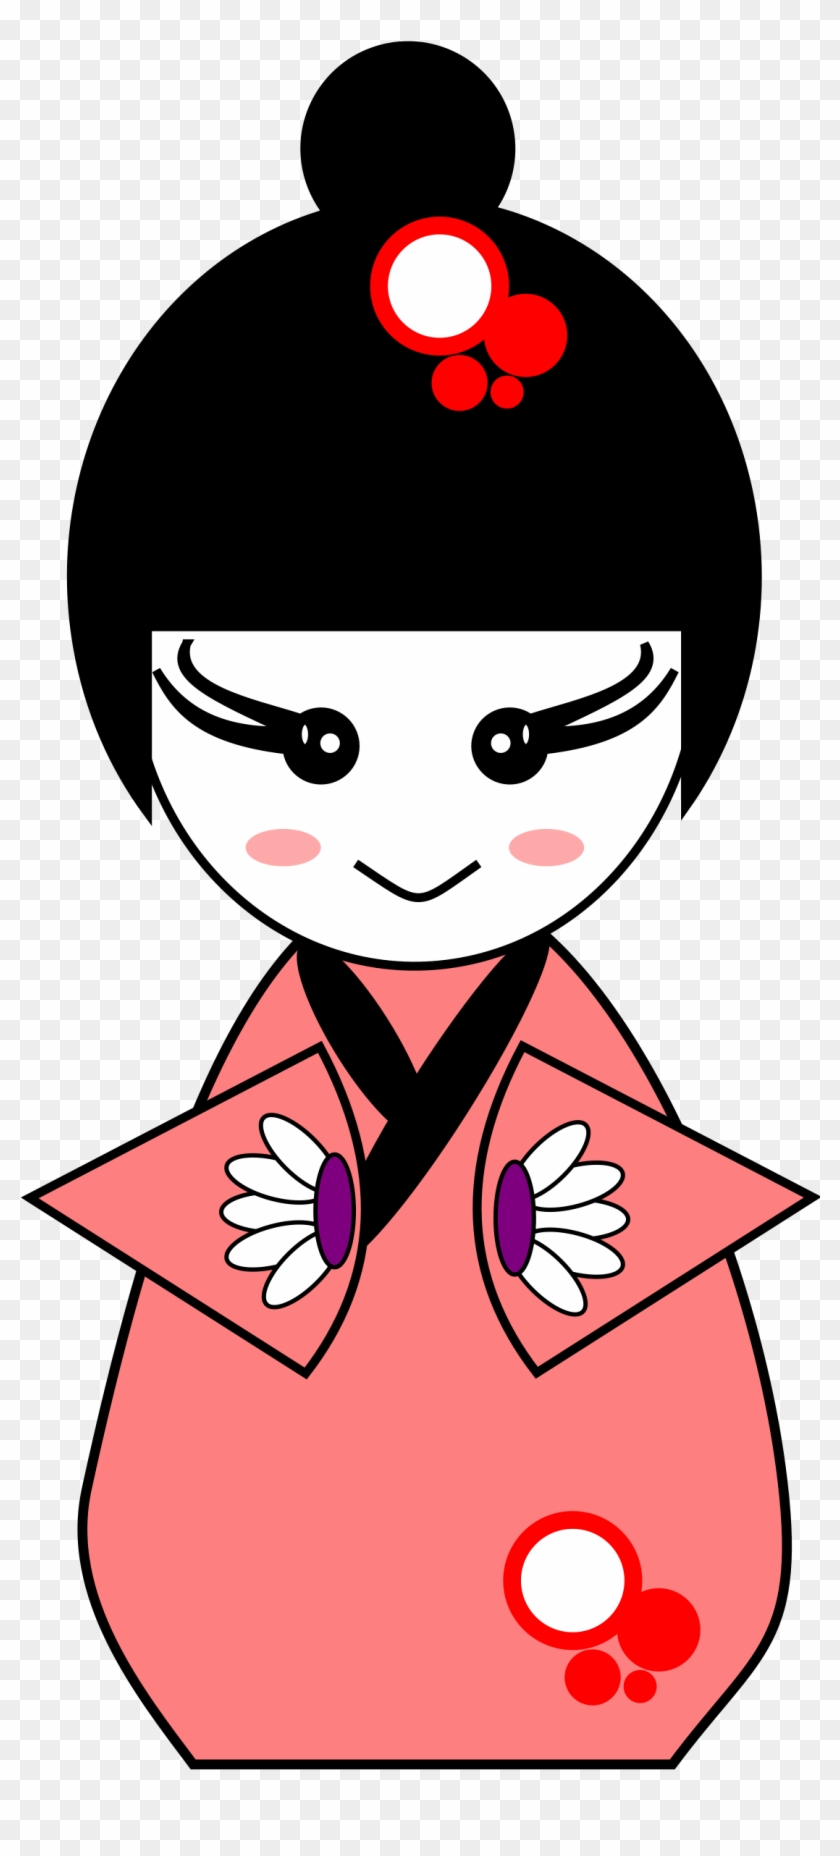 This Free Icons Png Design Of Geisha Doll Clipart #3312044